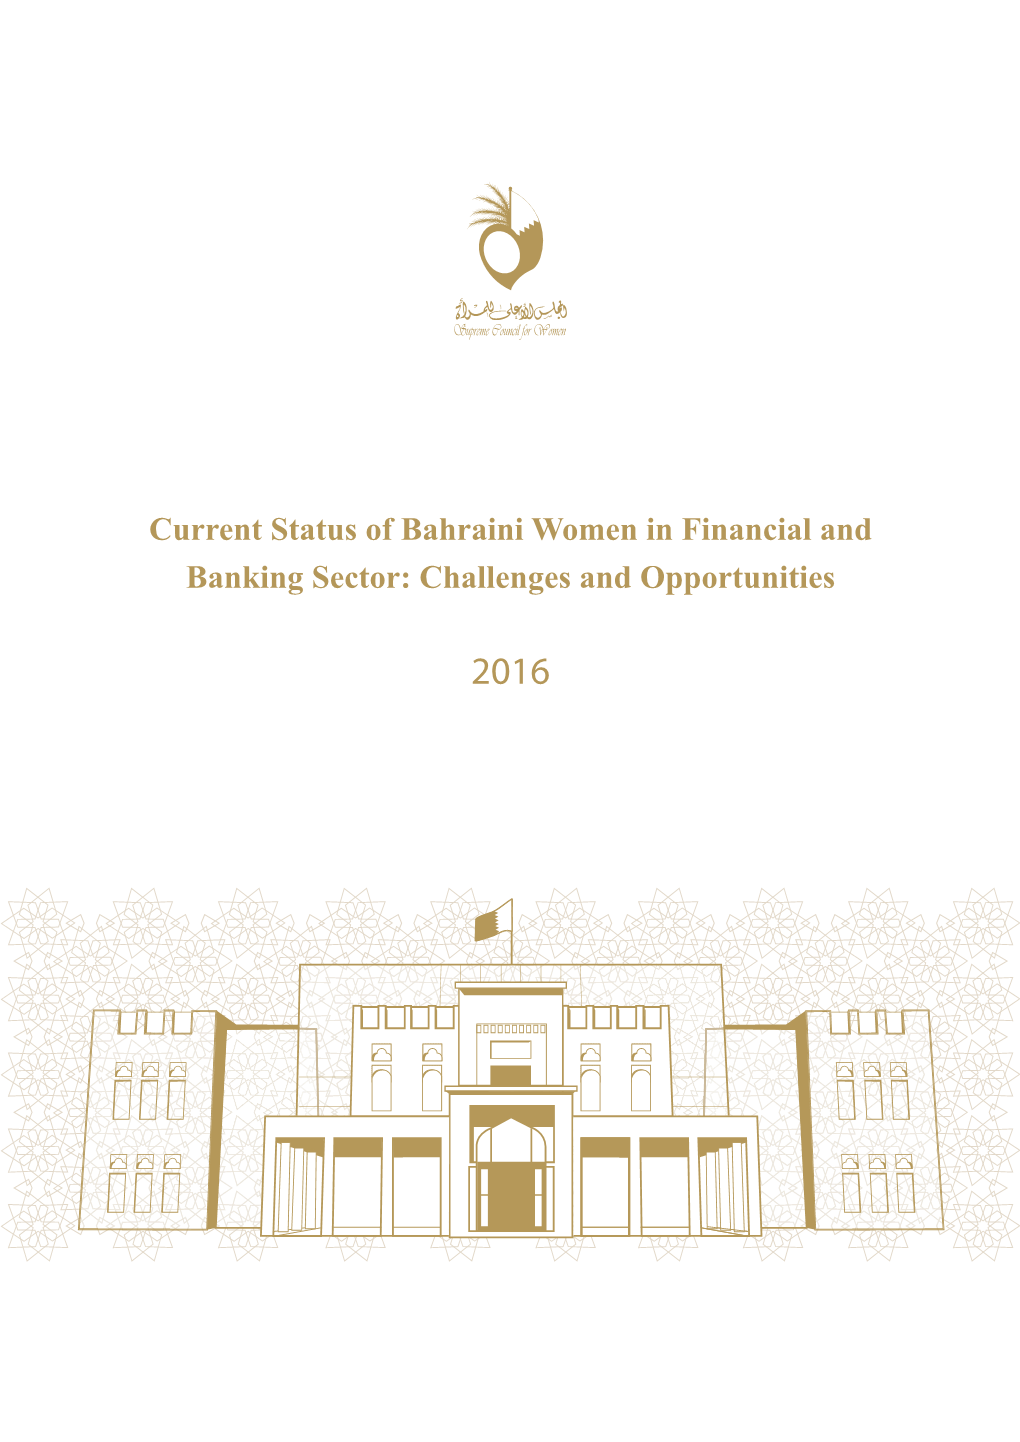 Current Status of Bahraini Women in Financial and Banking Sector: Challenges and Opportunities